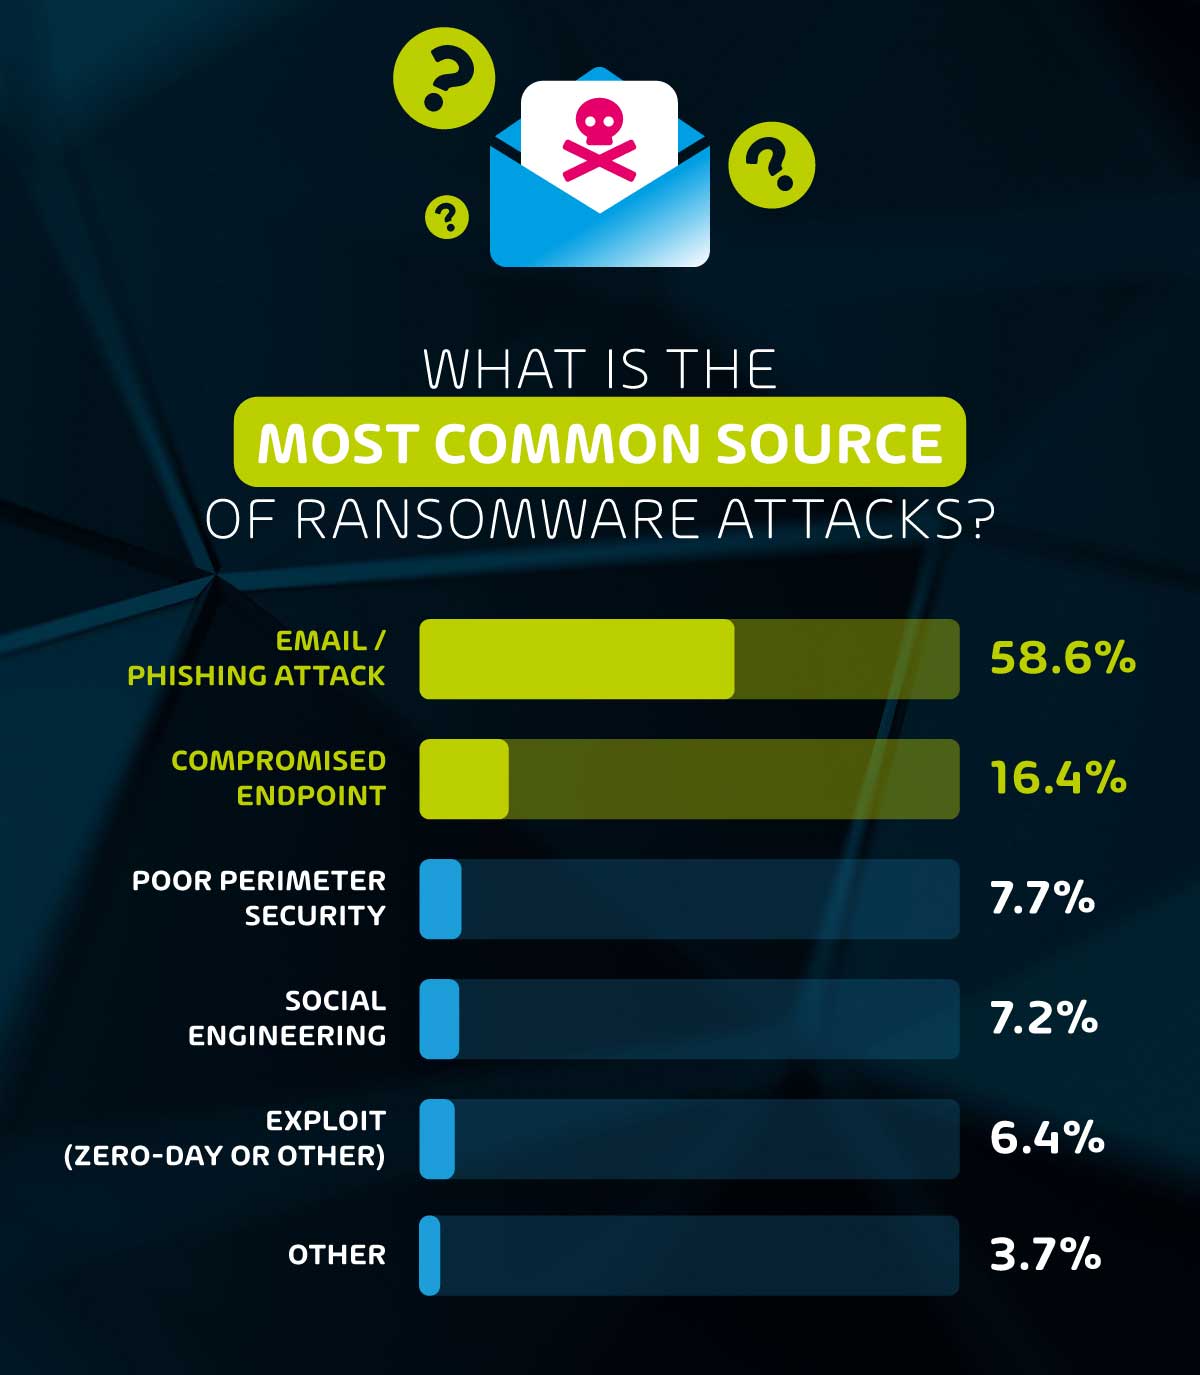 Most Common Source of Ransomware Attacks